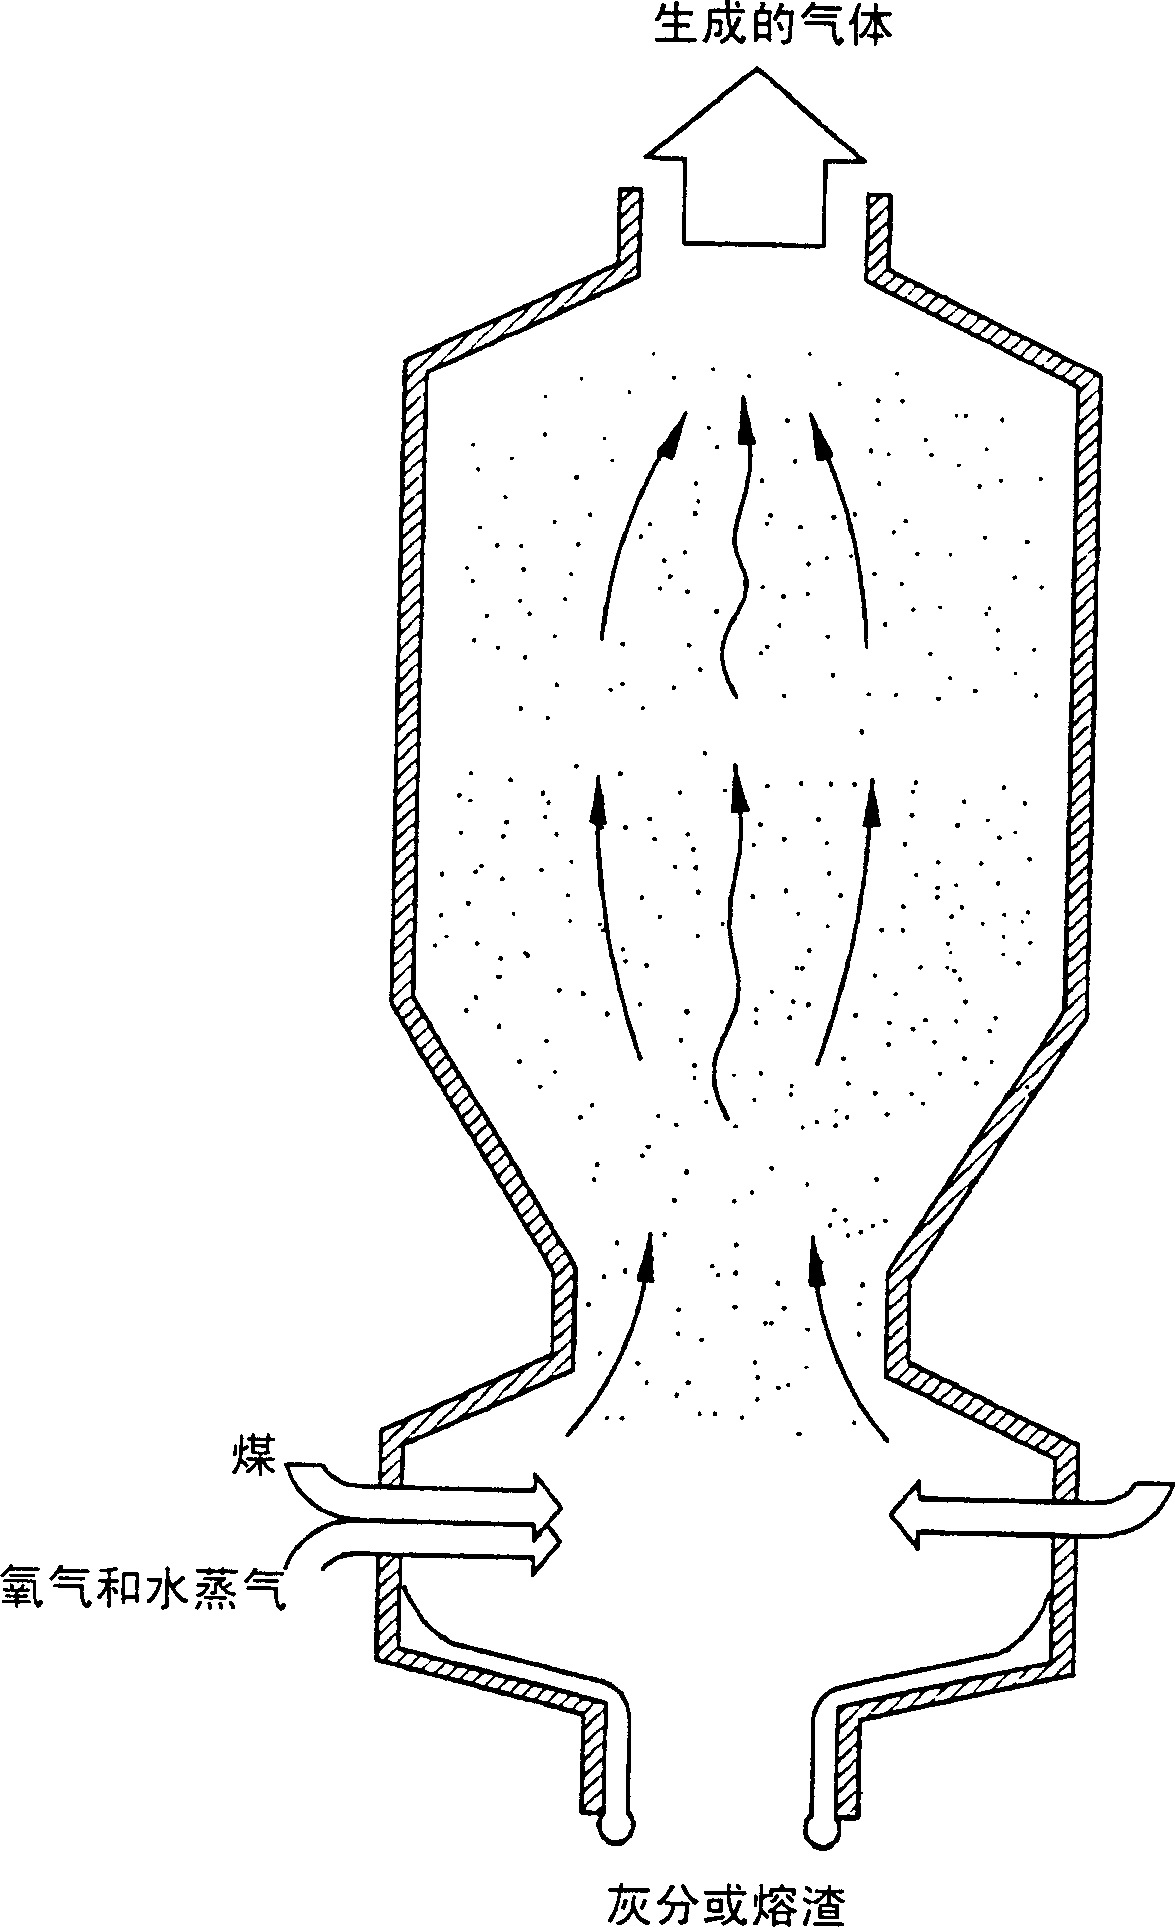 Method of gasifying carbonaceous material and apparatus therefor